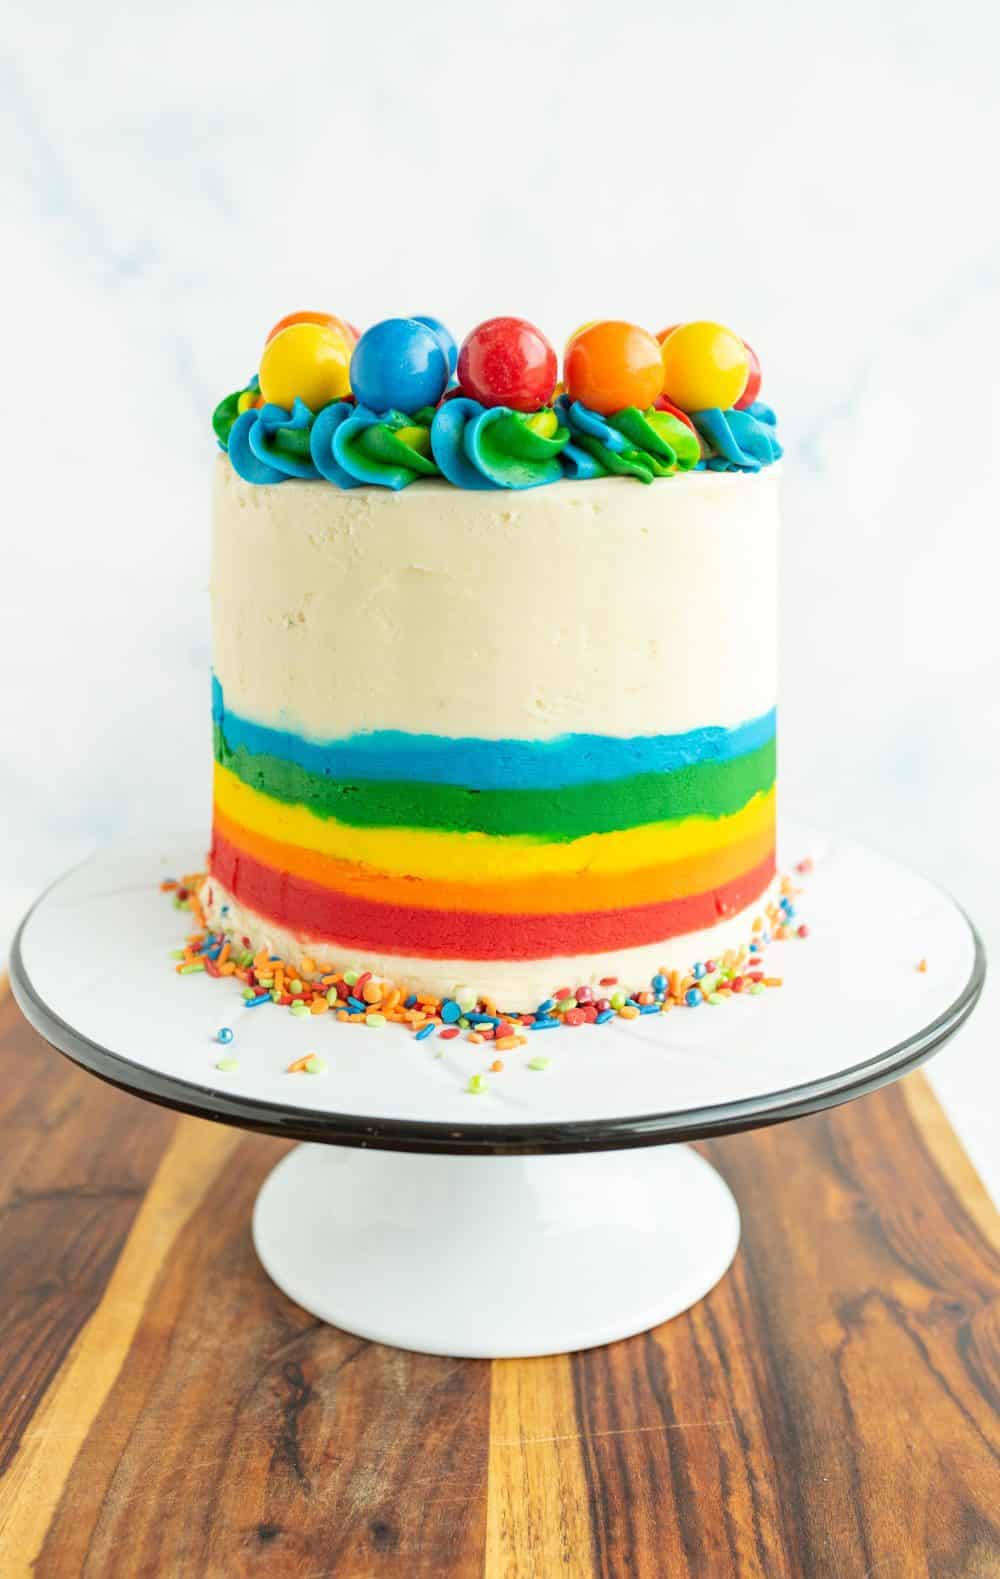 wooden board with a white stand and the rainbow cake is whole and the outer icing is decorated with the bottom half as a rainbow and top 3/4 white icing and along the top of the cake is rainbow piped dollops with different colorful gumboils on top